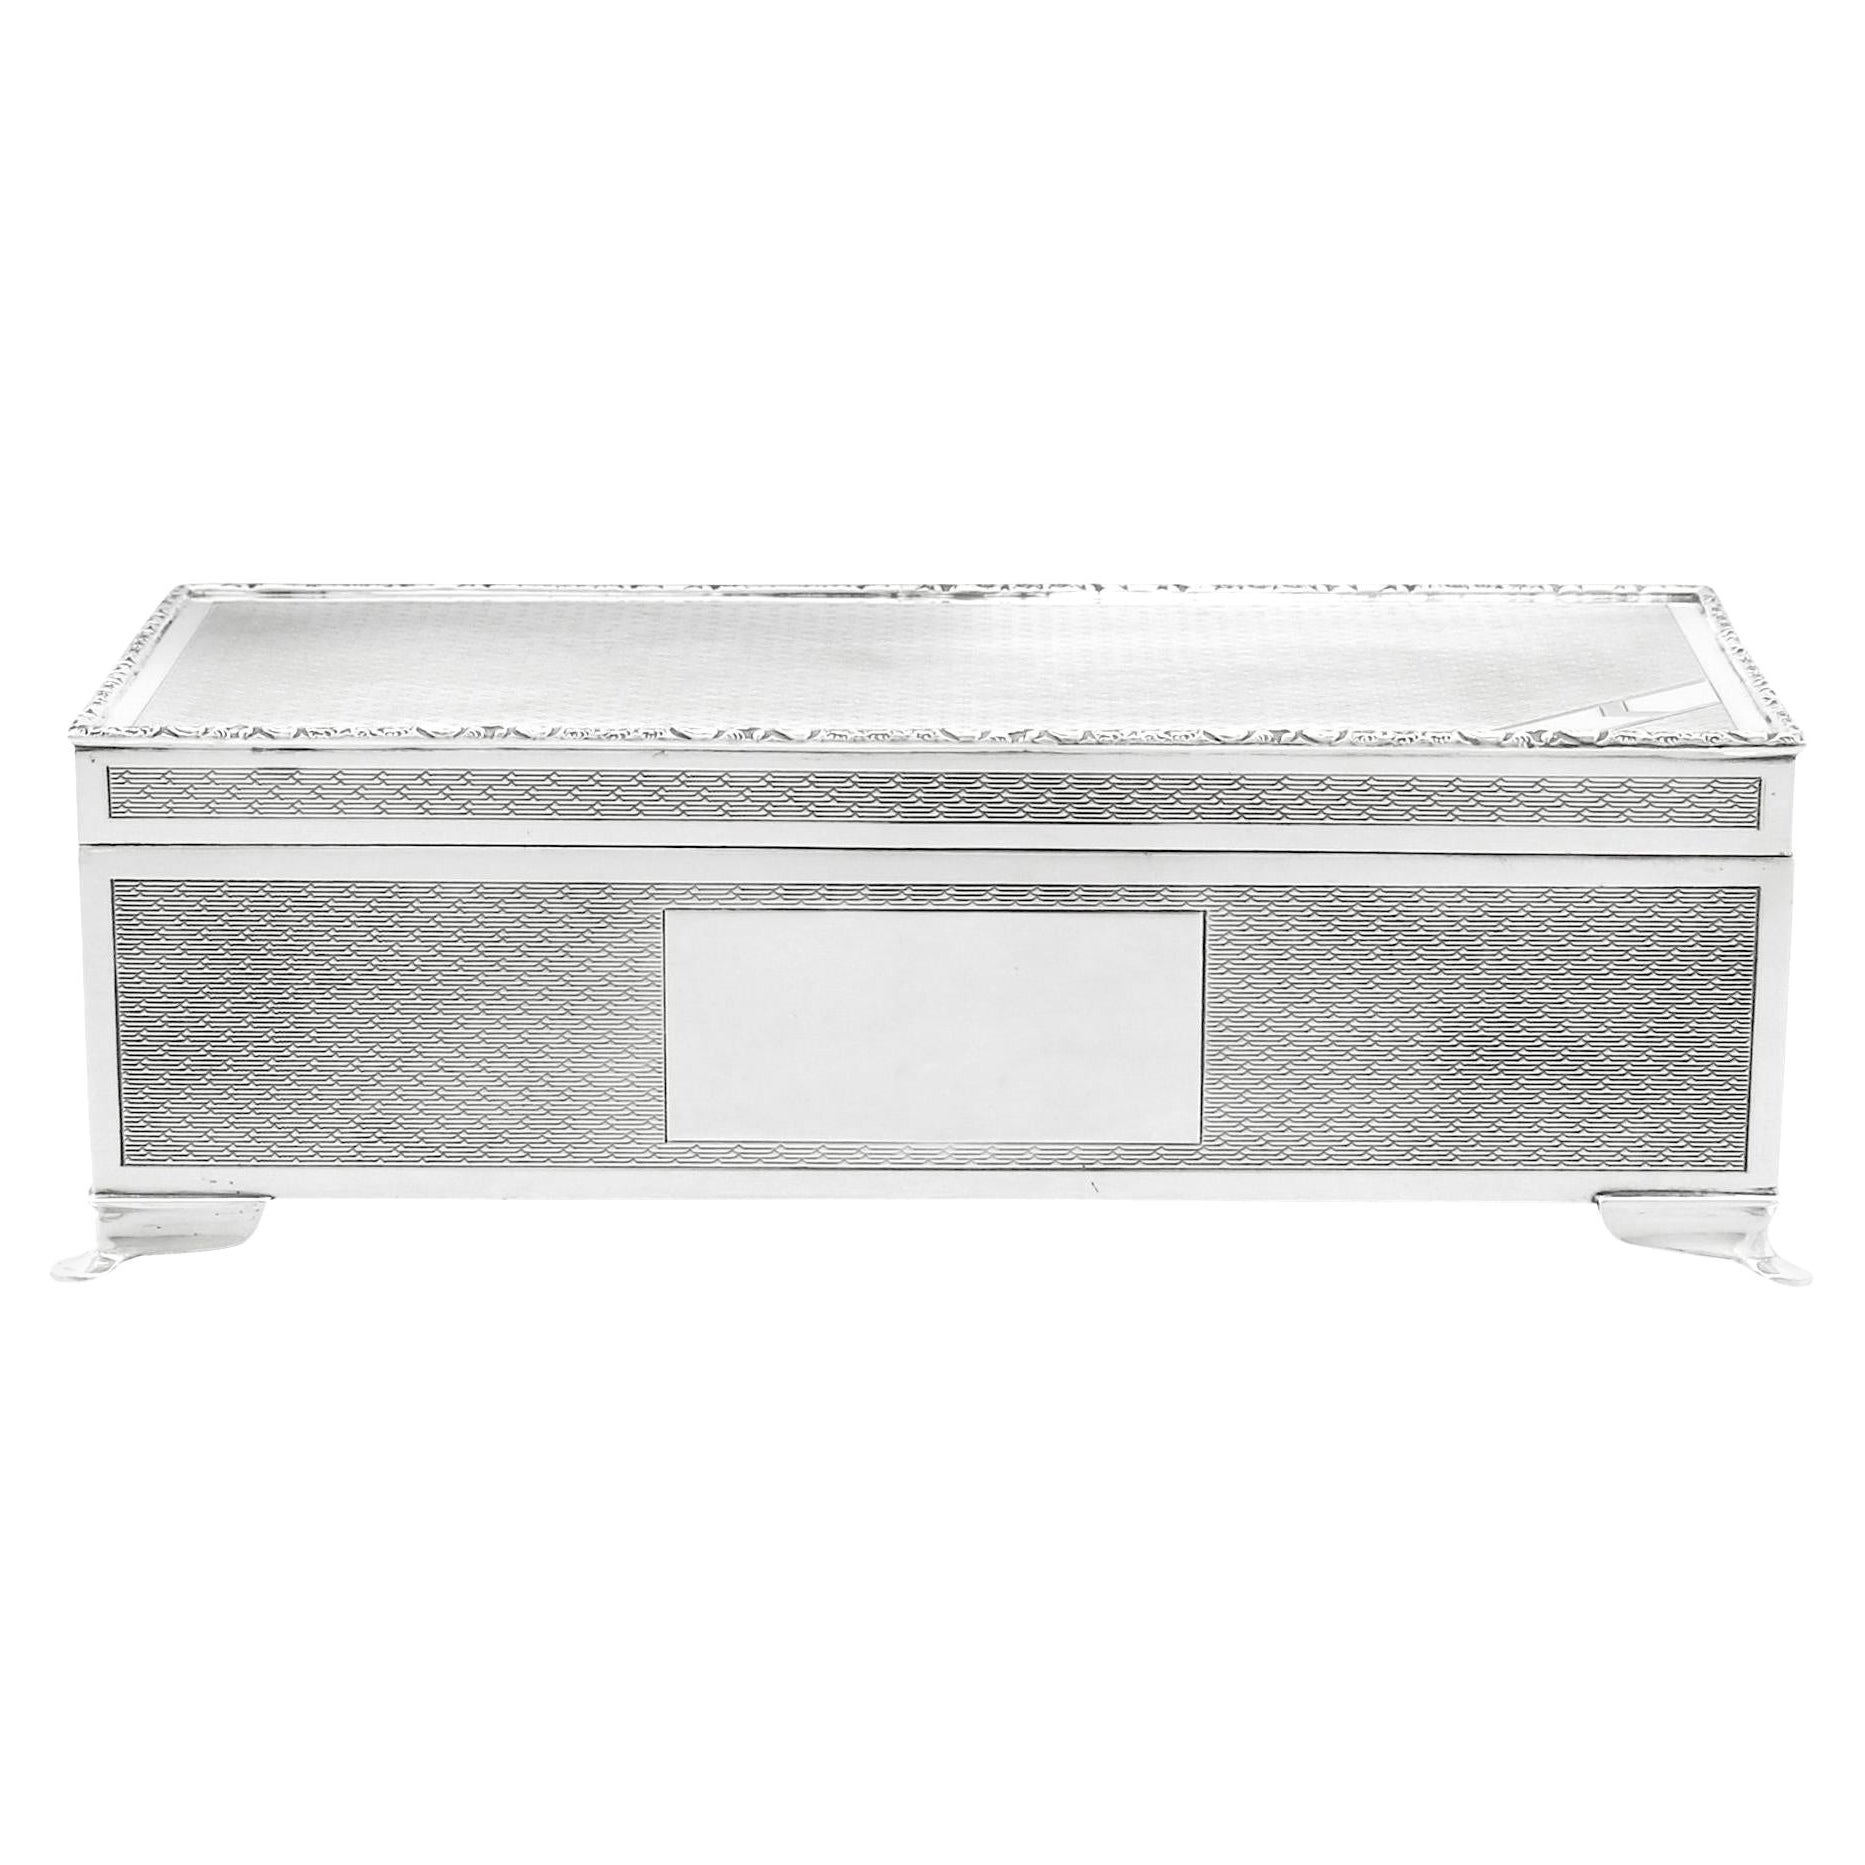 Harman Brothers 1970's Sterling Silver Cigarette Jewelry Box For Sale